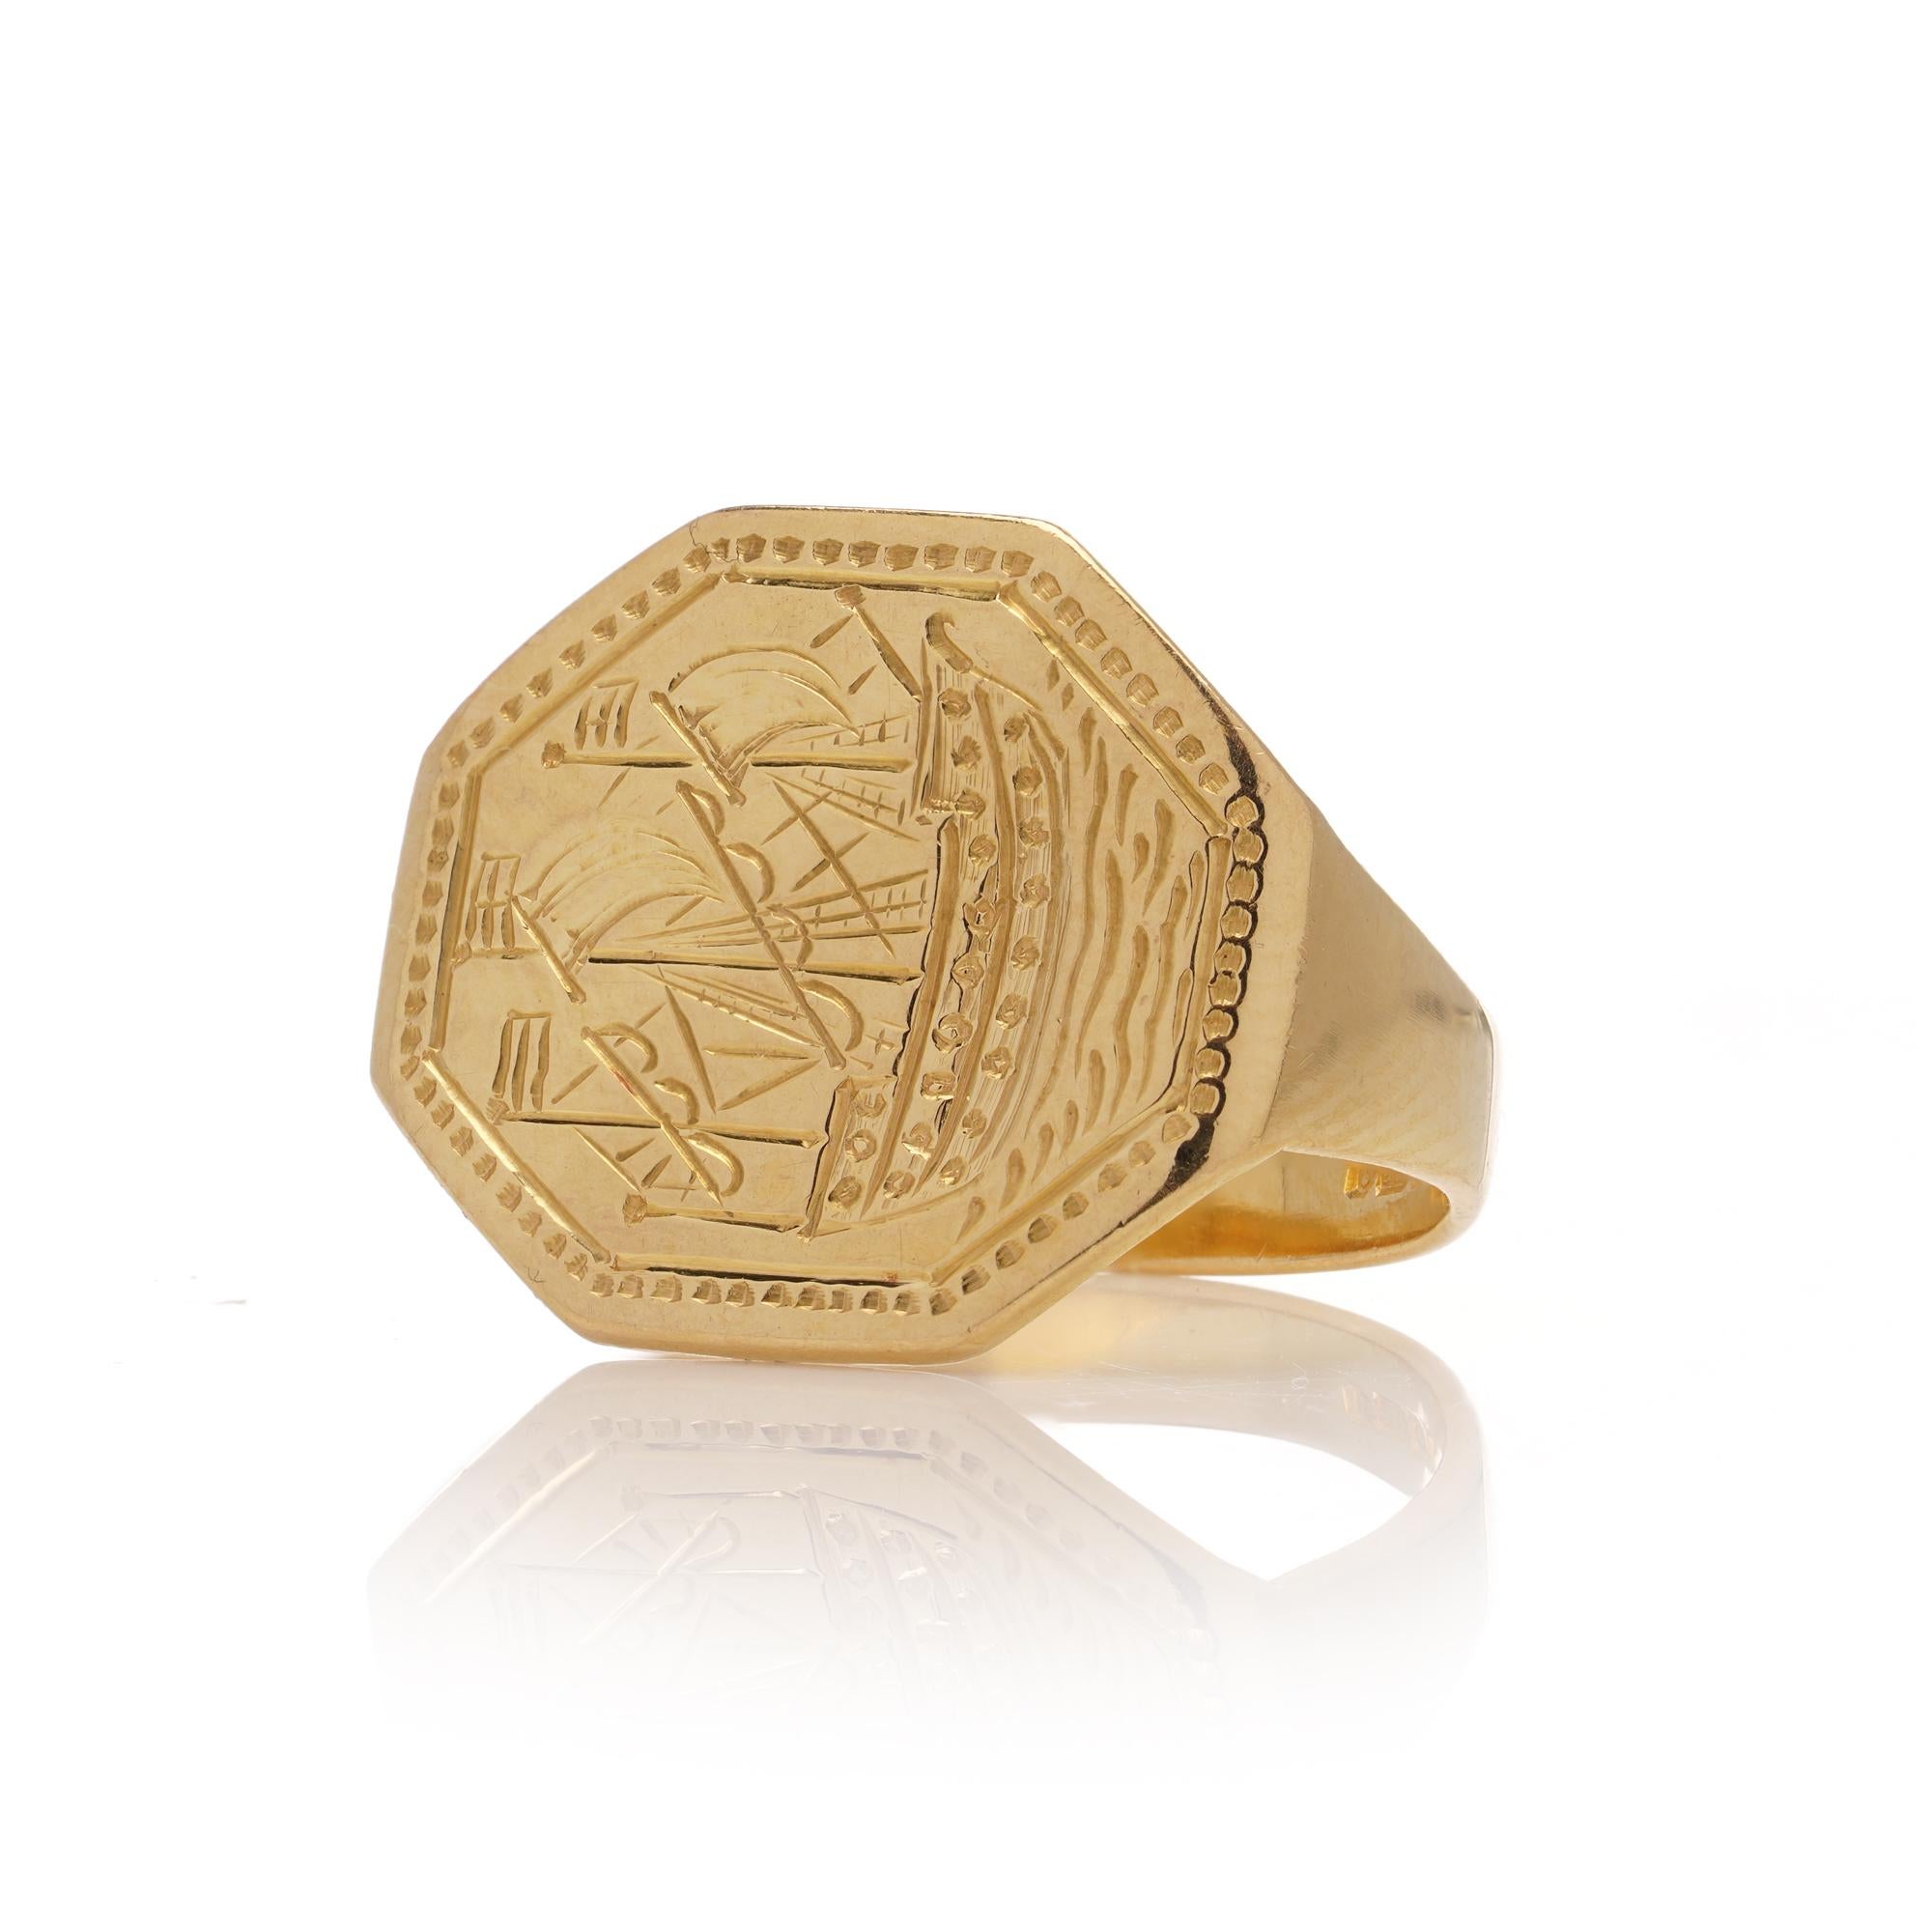 Vintage 22kt. yellow gold signet ring featuring the man-of-war ship In Good Condition For Sale In Braintree, GB